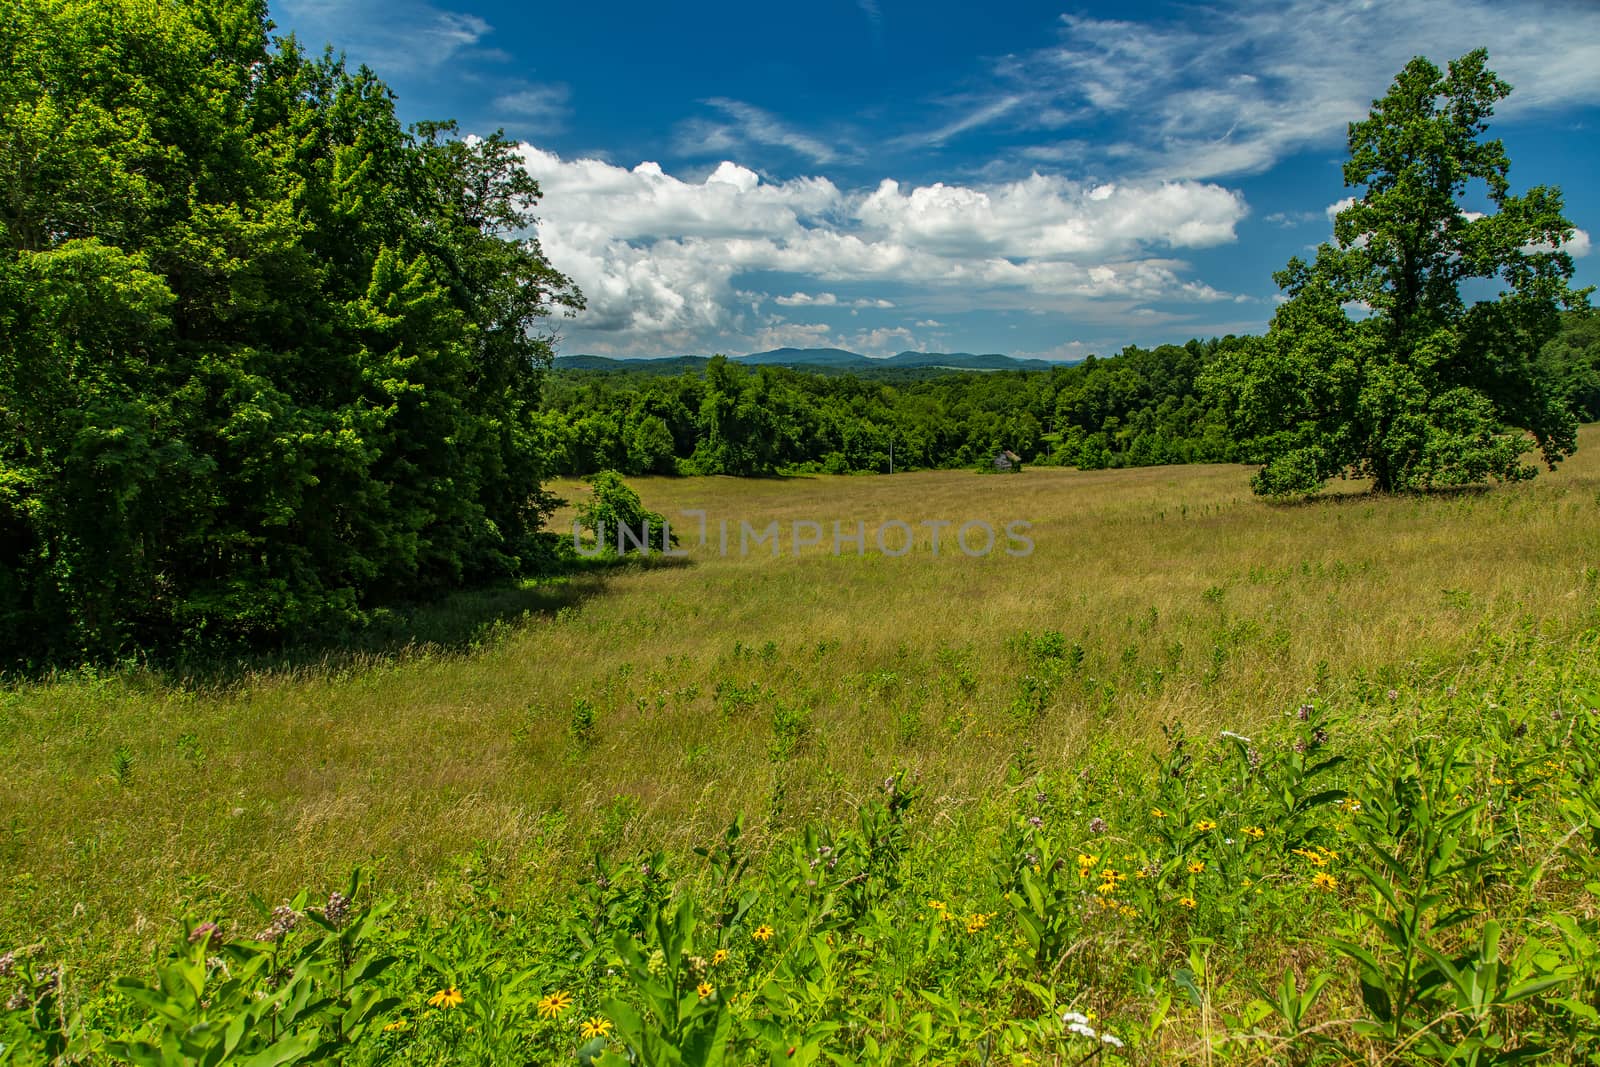 A view of a meadow in the foothills of the Blue Ridge Mountains in Franklin County, Virginia